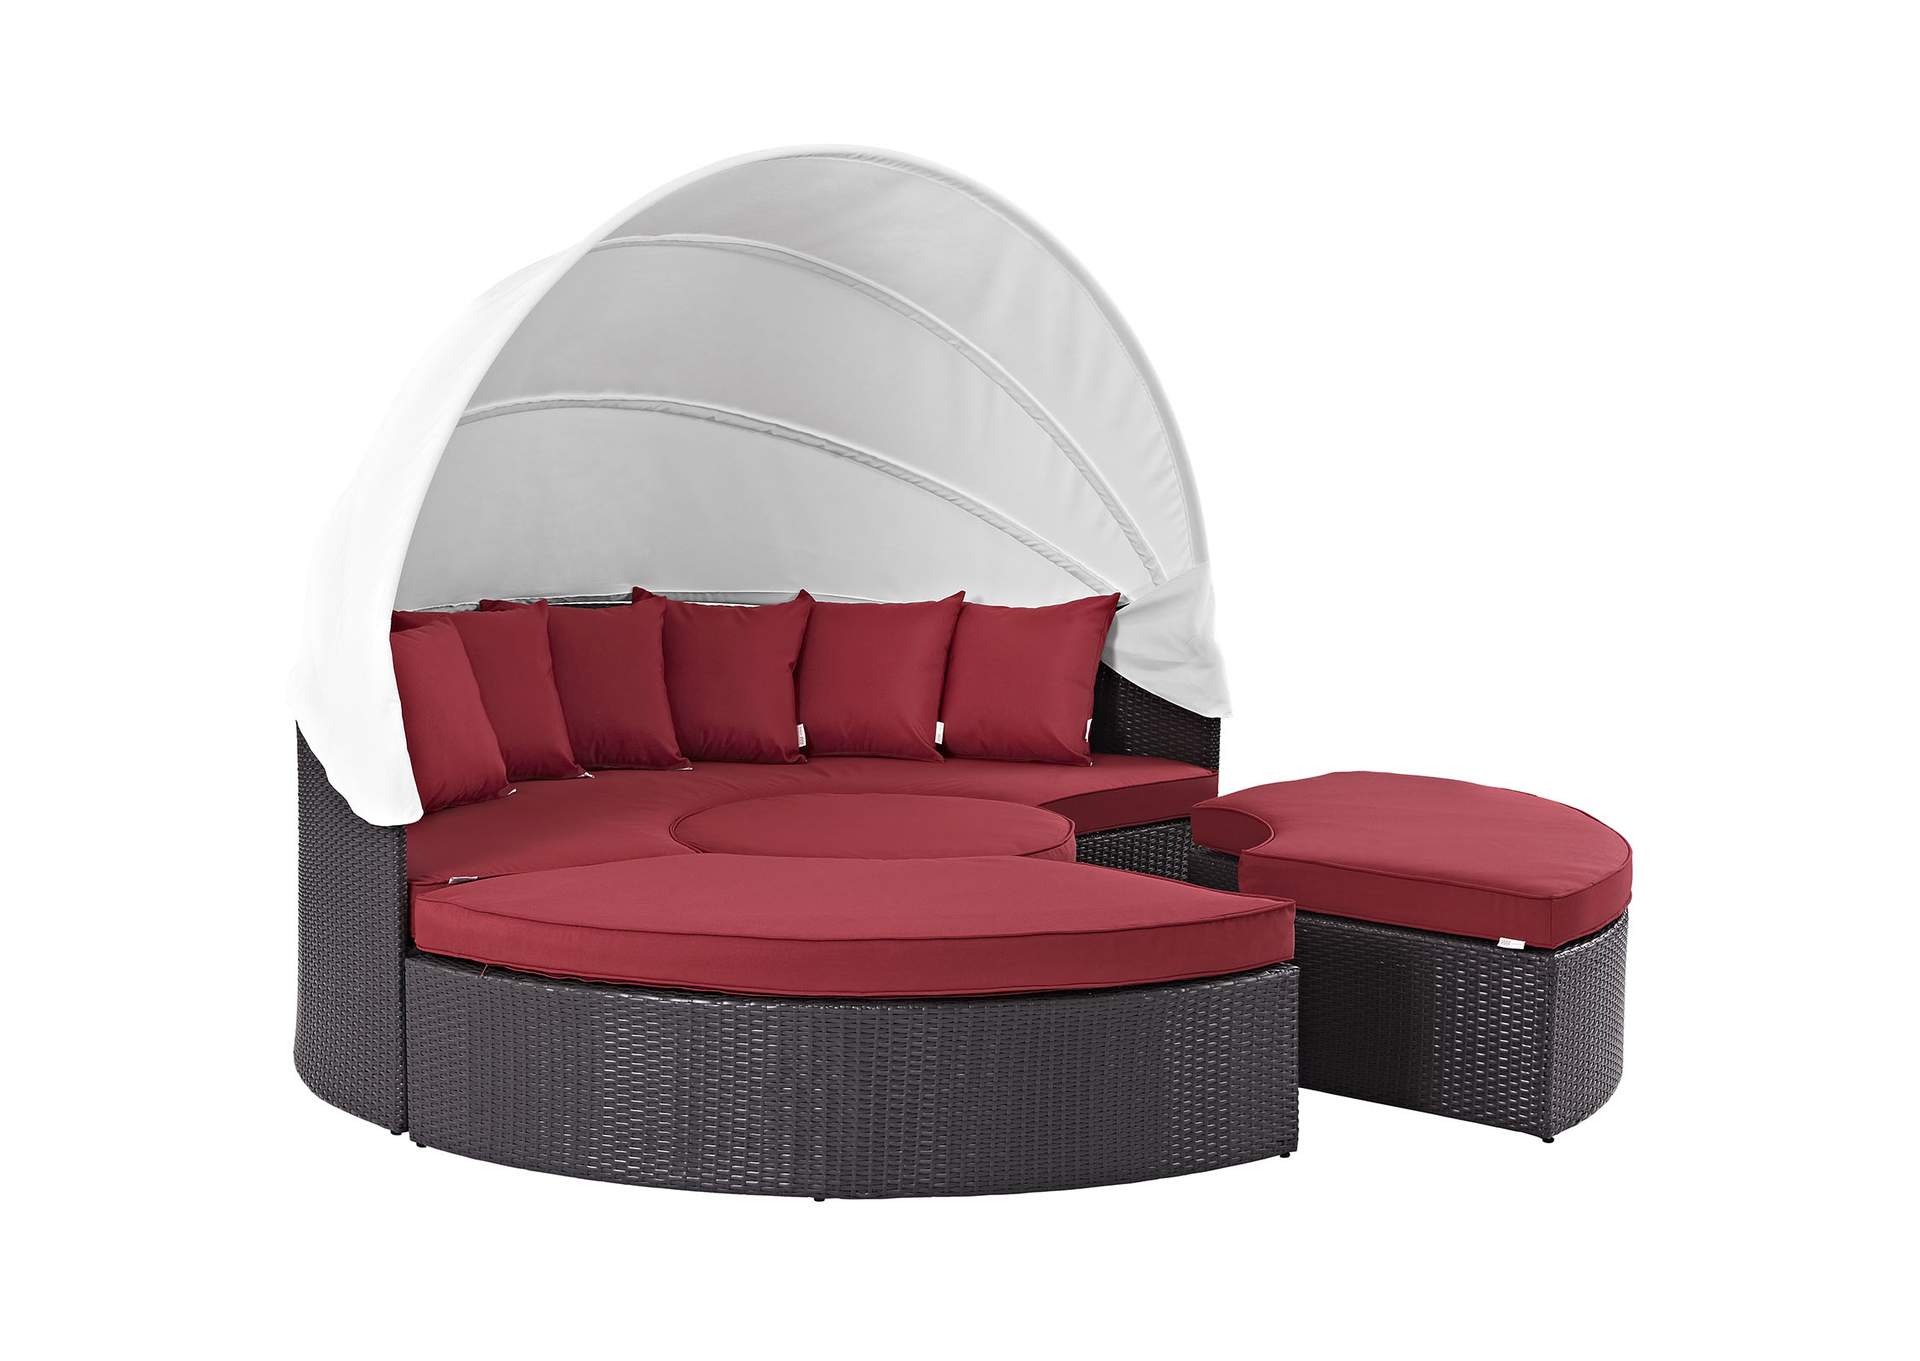 Espresso Red Convene Canopy Outdoor Patio Daybed,Modway